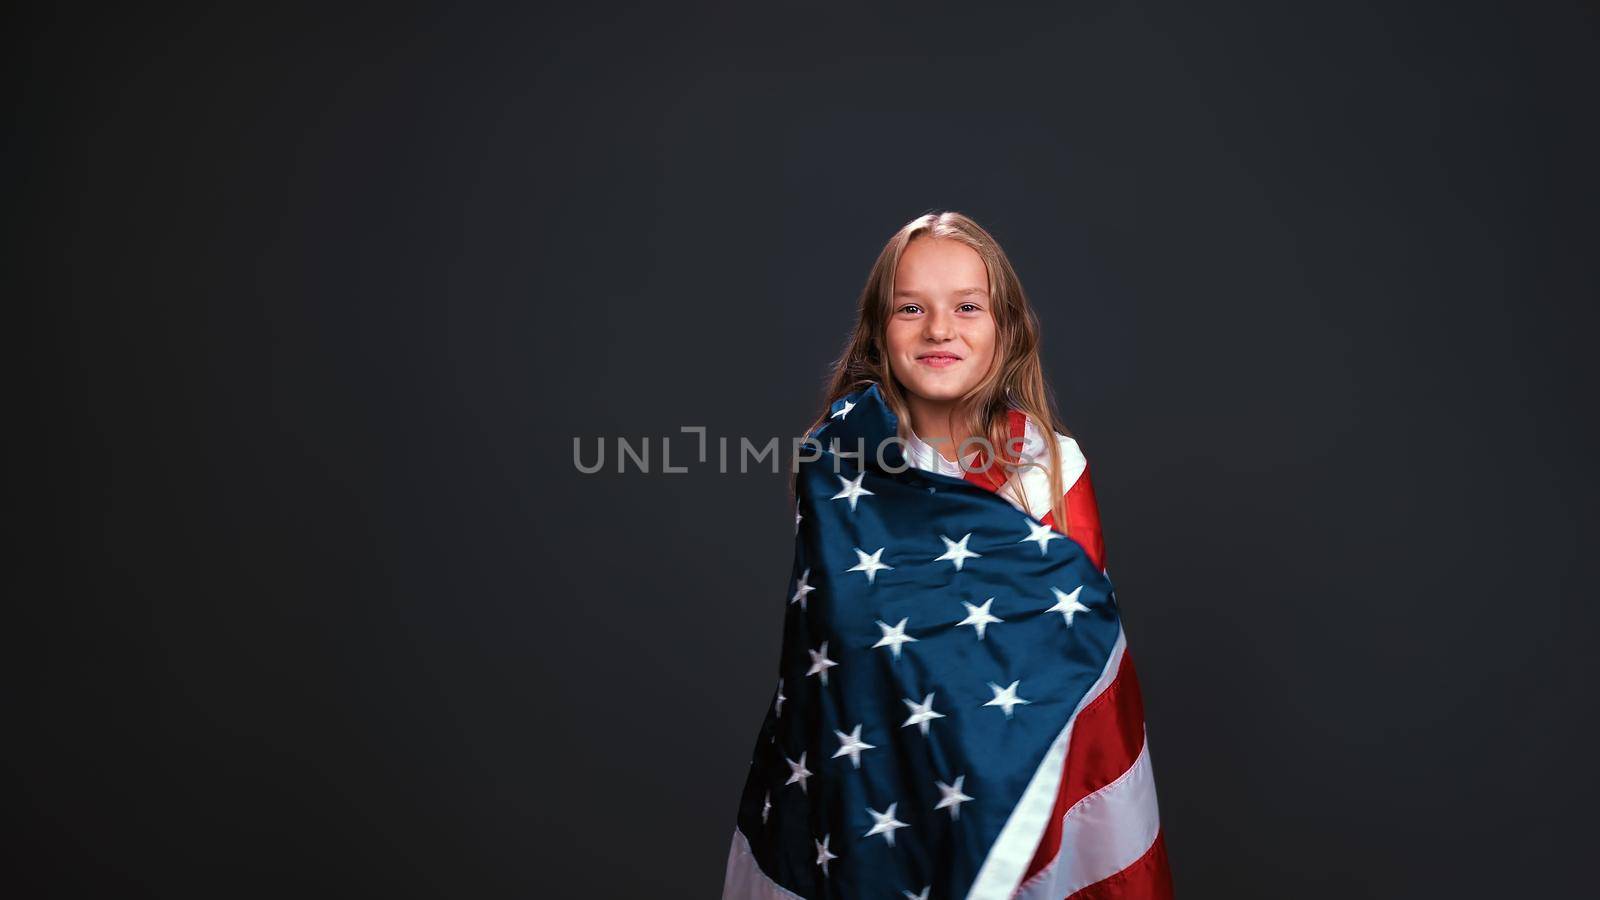 Little girl patriot wrapped in a USA flag celebrates independence day expresses patriotism isolated on black background.